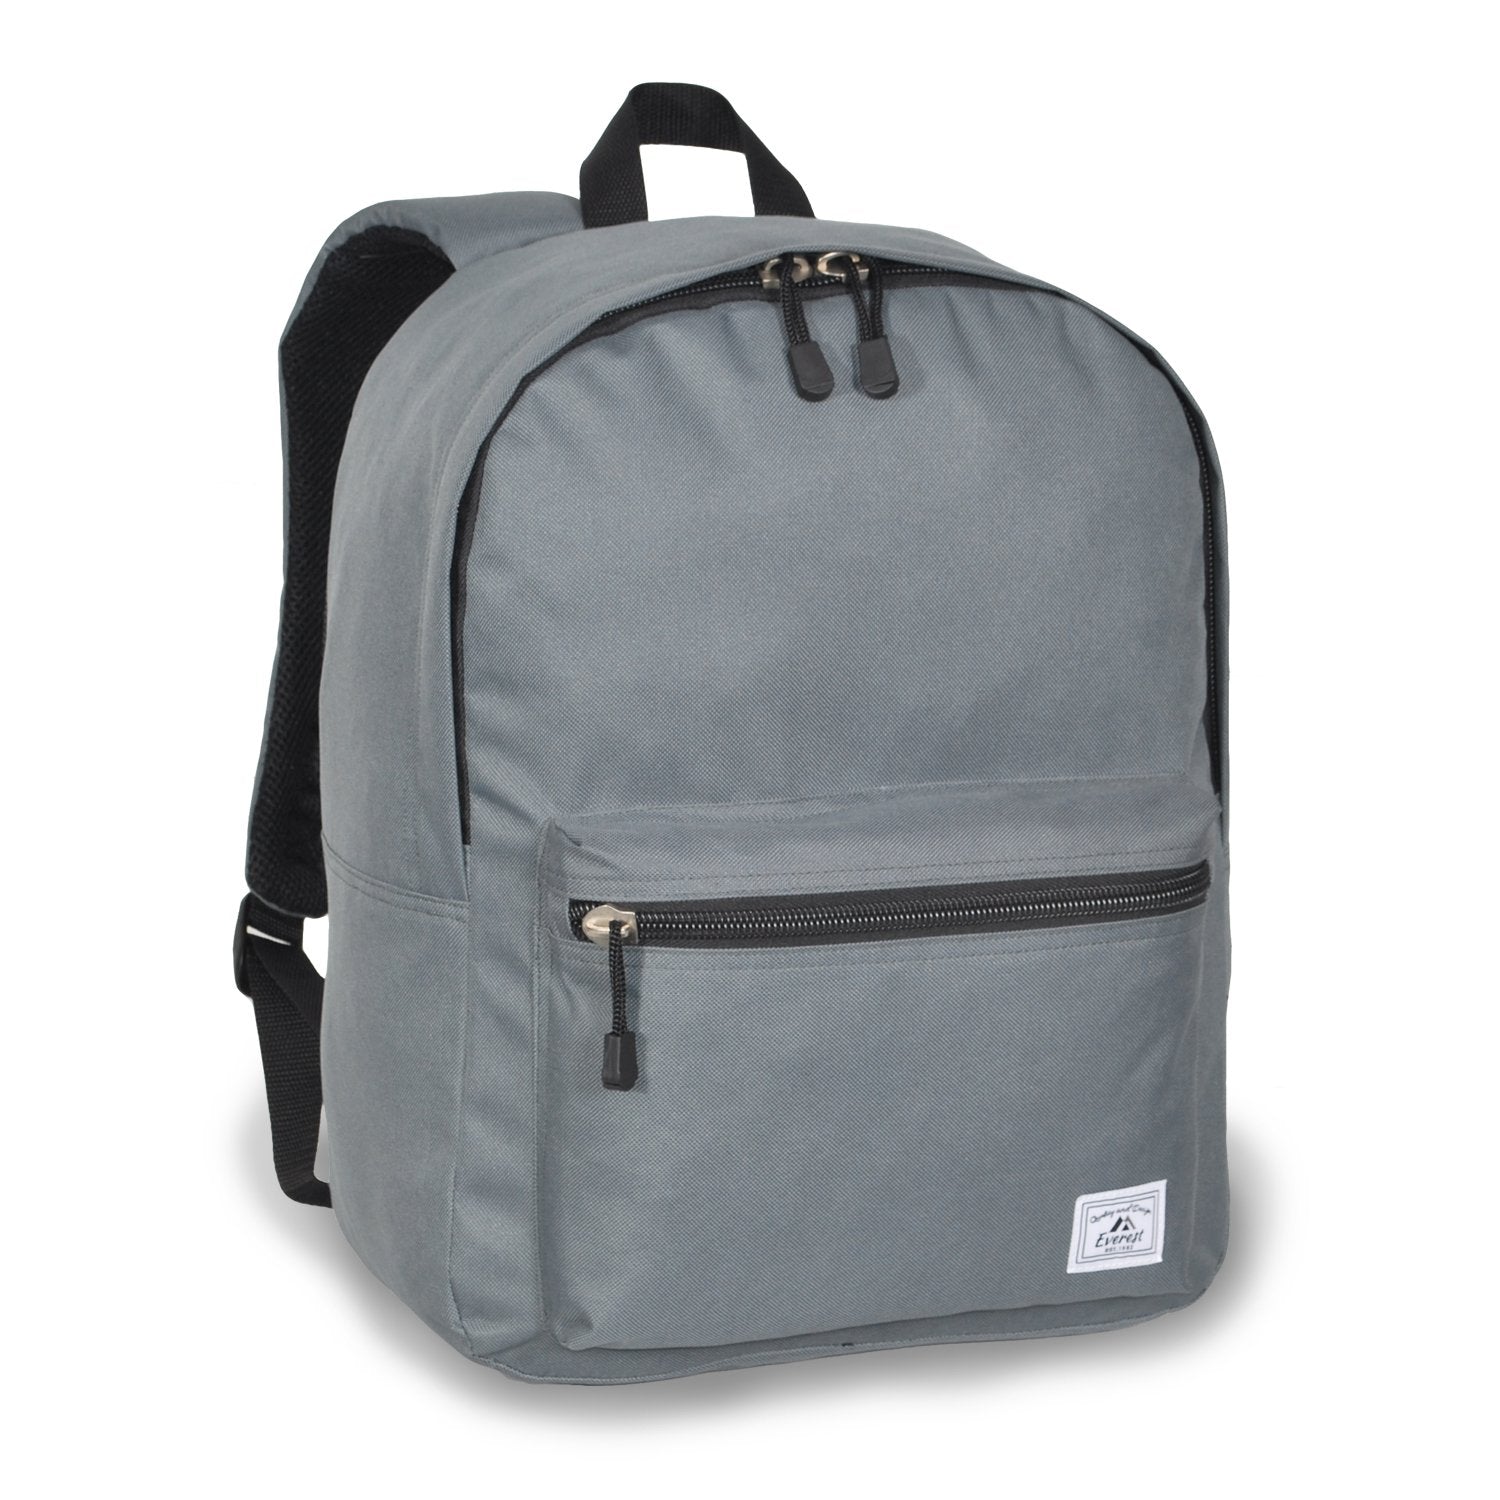 Everest-Deluxe Laptop Backpack-eSafety Supplies, Inc